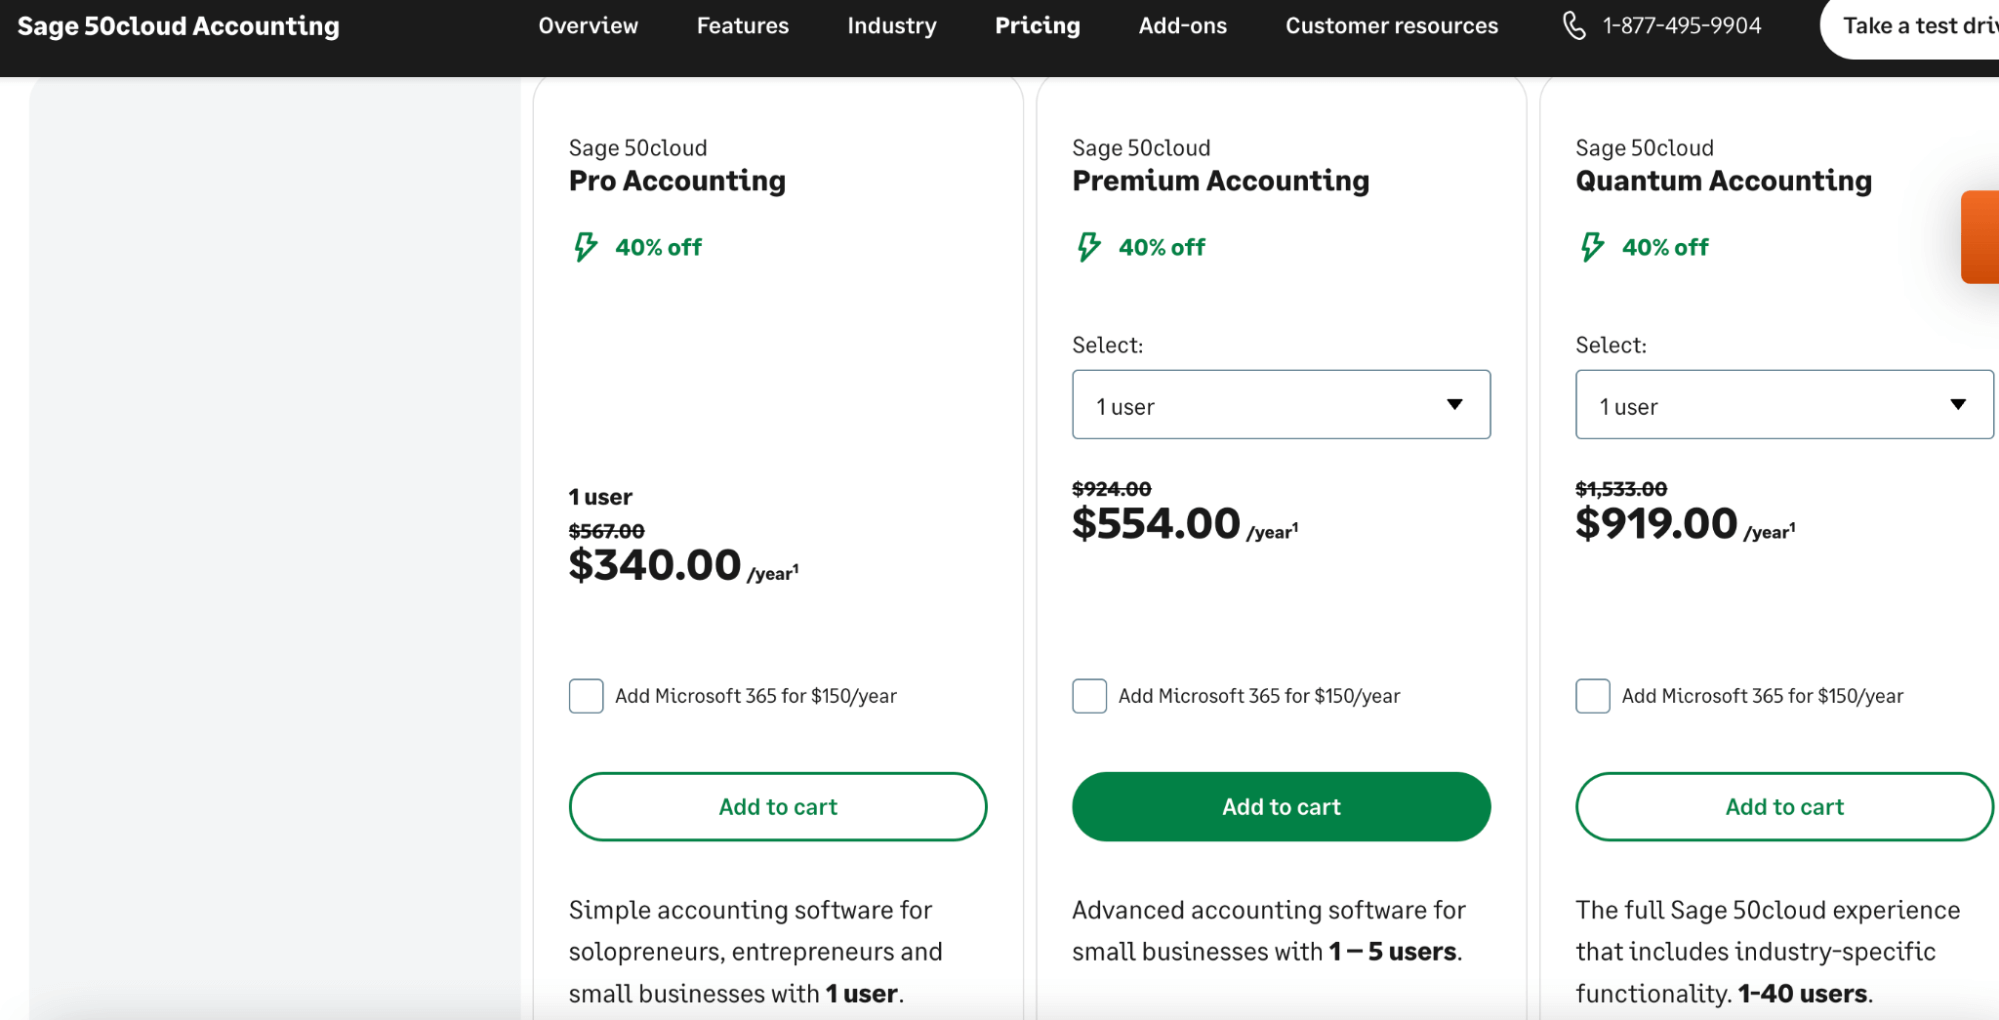 The pricing page for Sage 50cloud